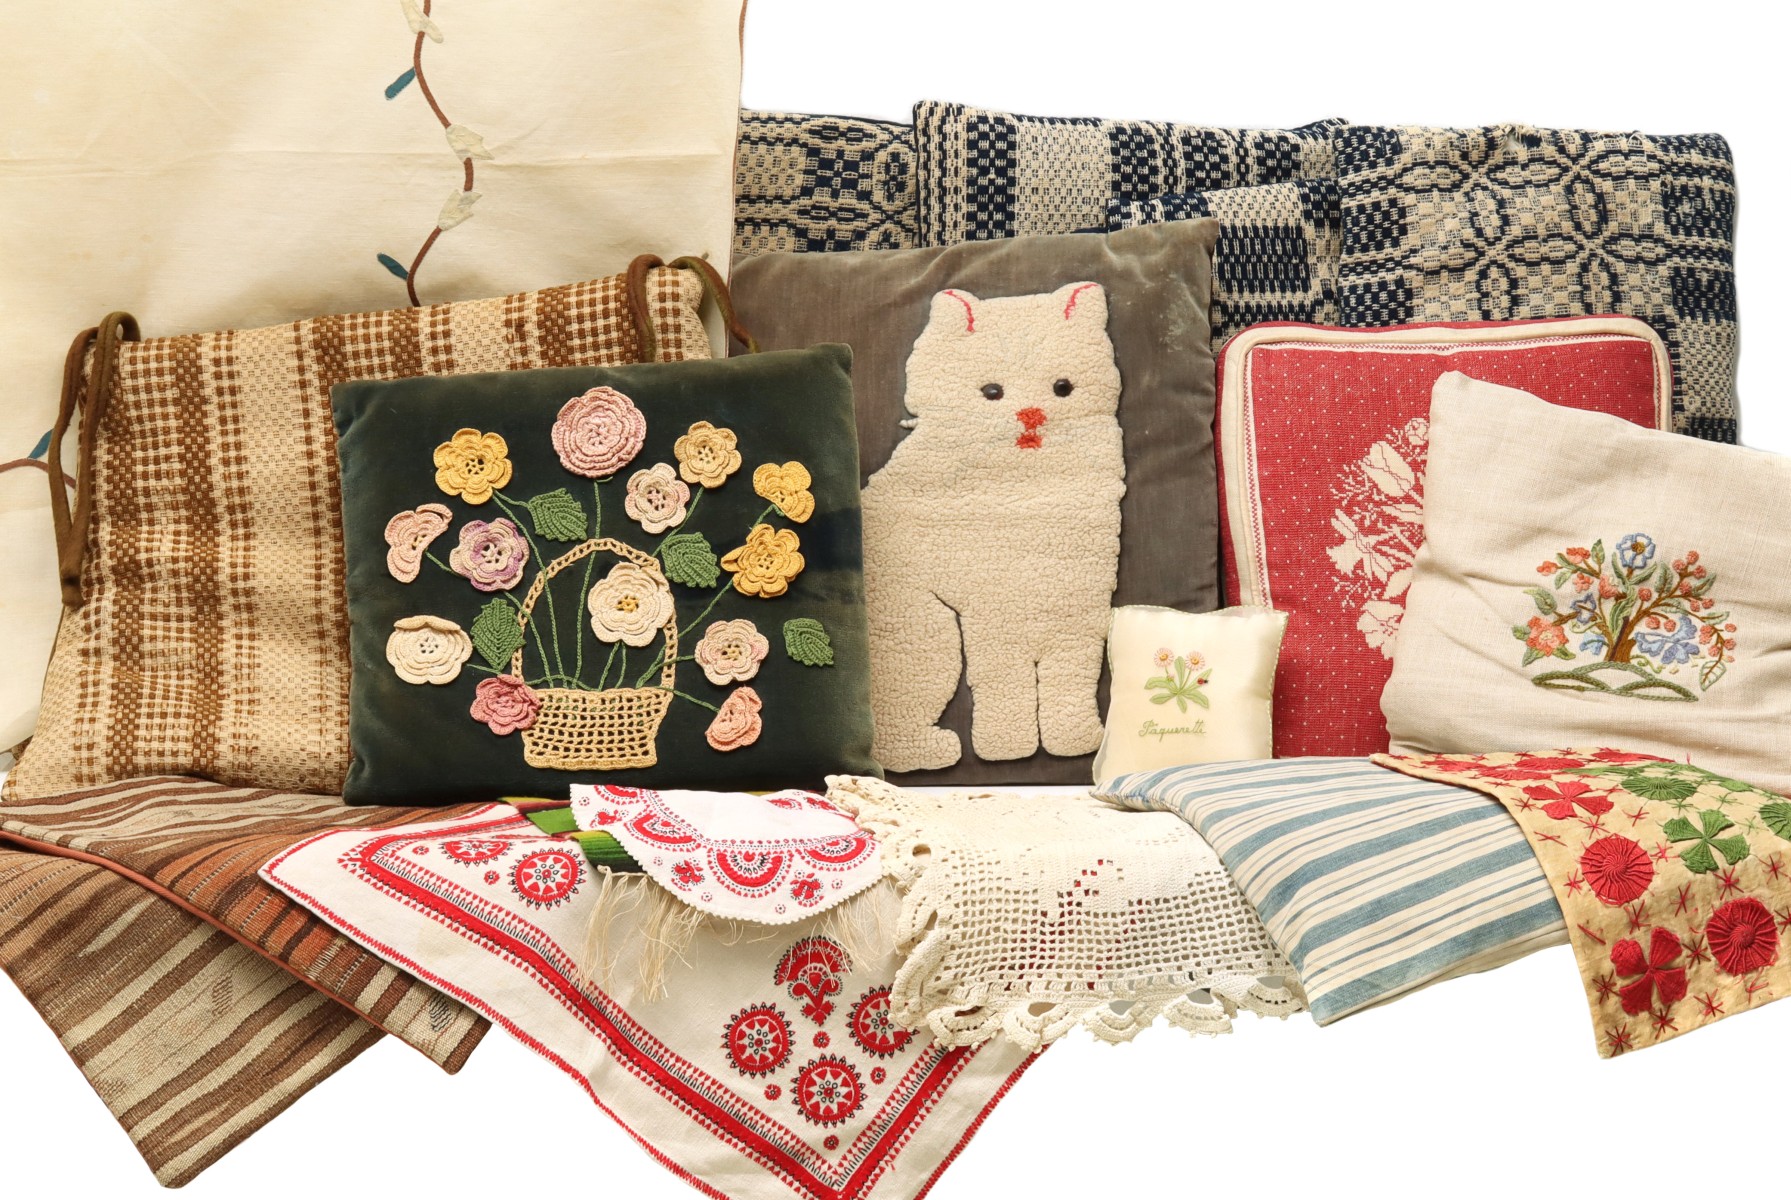 NEEDLEWORK, EMBROIDERY, TEXTILES, AND COVERLET PILLOWS